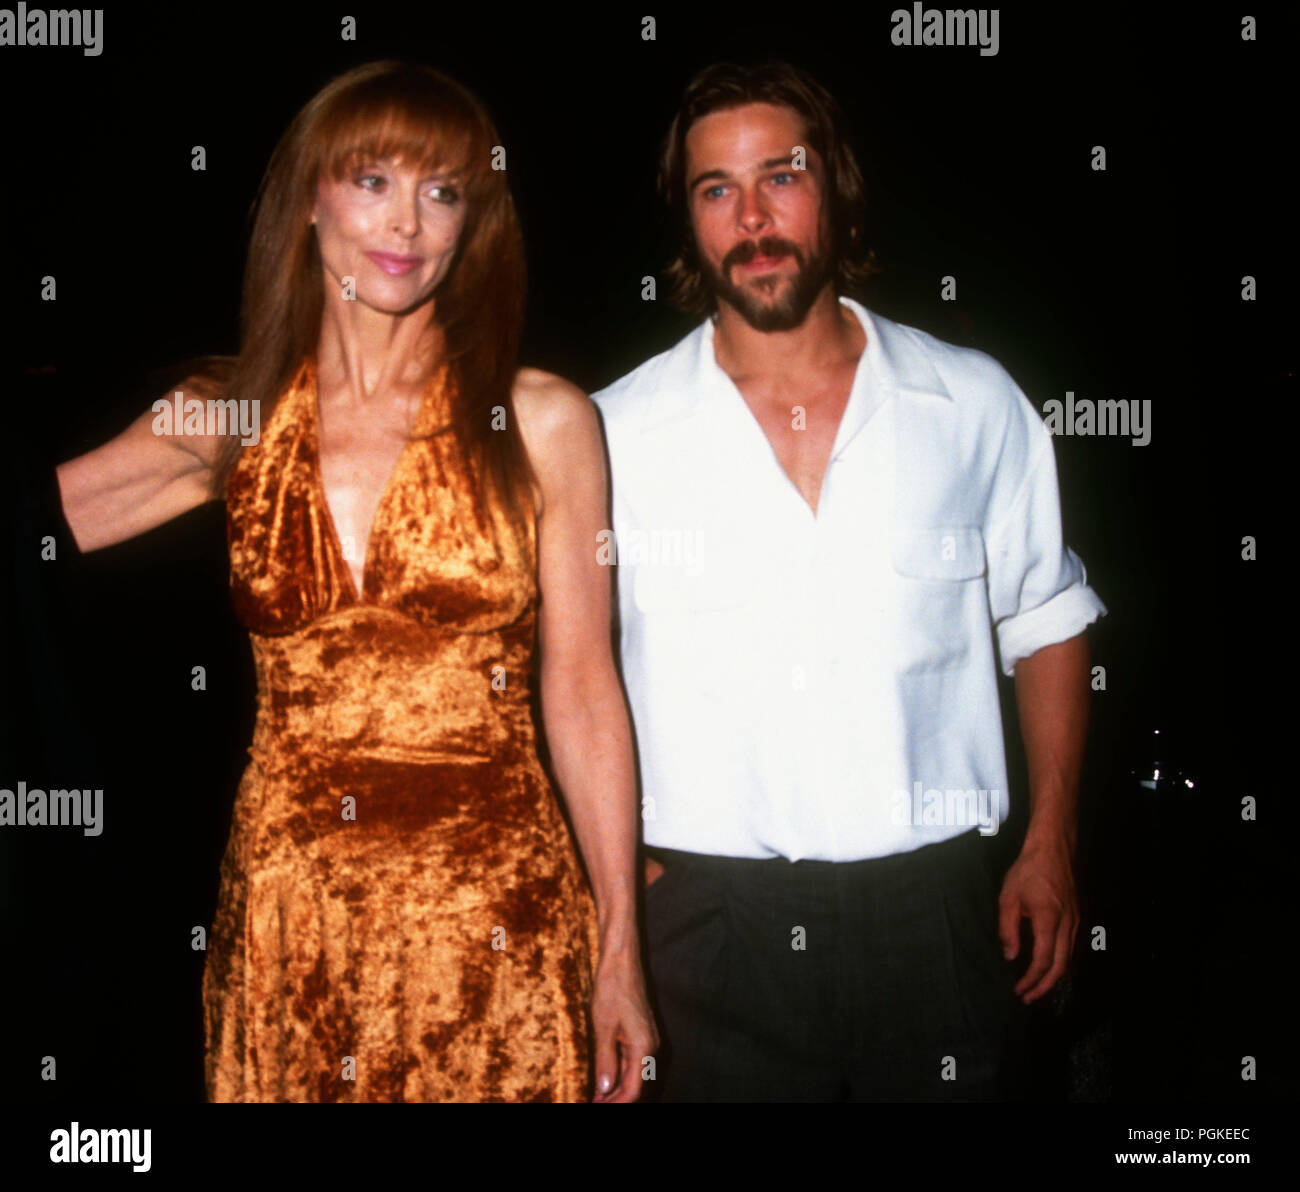 BEVERLY HILLS, CA - AUGUST 19: (L-R) Actress Tina Louise and actor Brad Pitt attend the 'Johnny Suede' Beverly Hills Premiere on August 19, 1992 at the Laemmle's Fine Arts Theatre in Beverly Hills, California. Photo by Barry King/Alamy Stock Photo Stock Photo